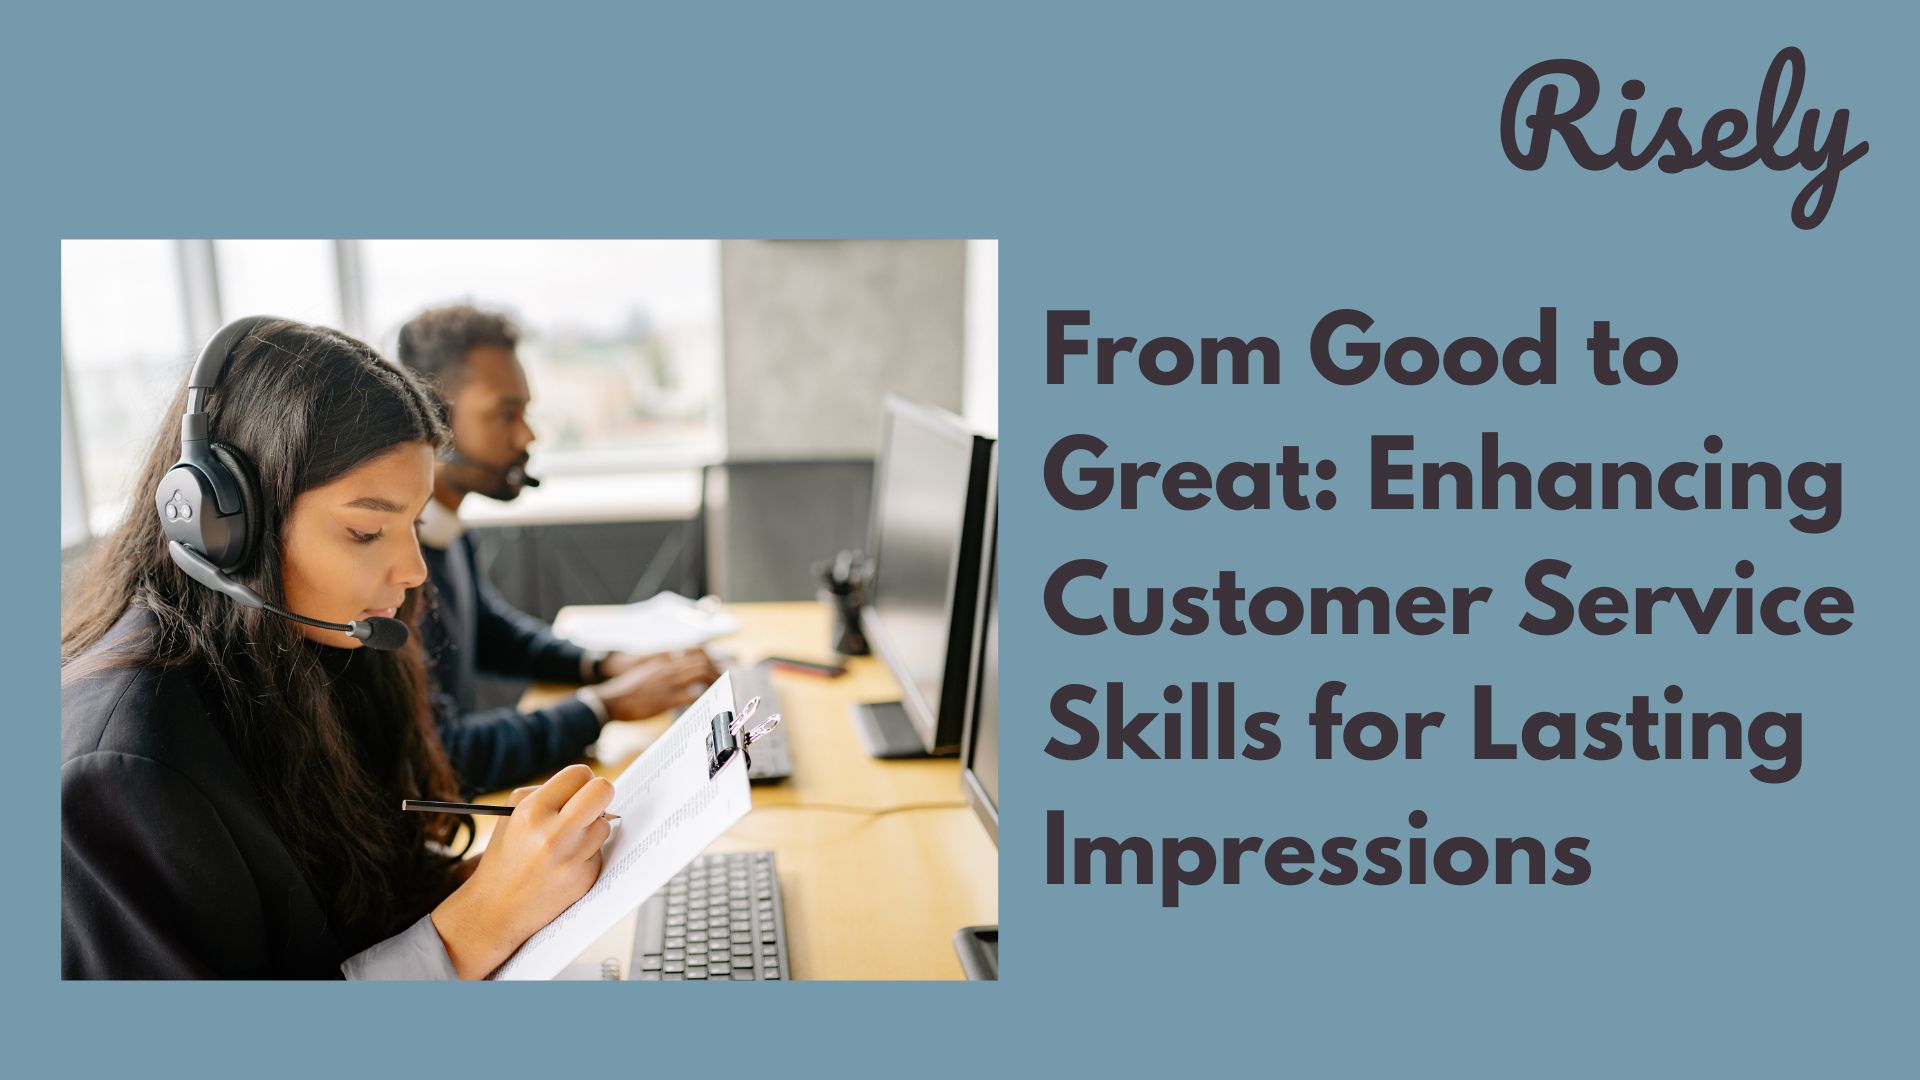 From Good to Great: Enhancing Customer Service Skills for Lasting Impressions